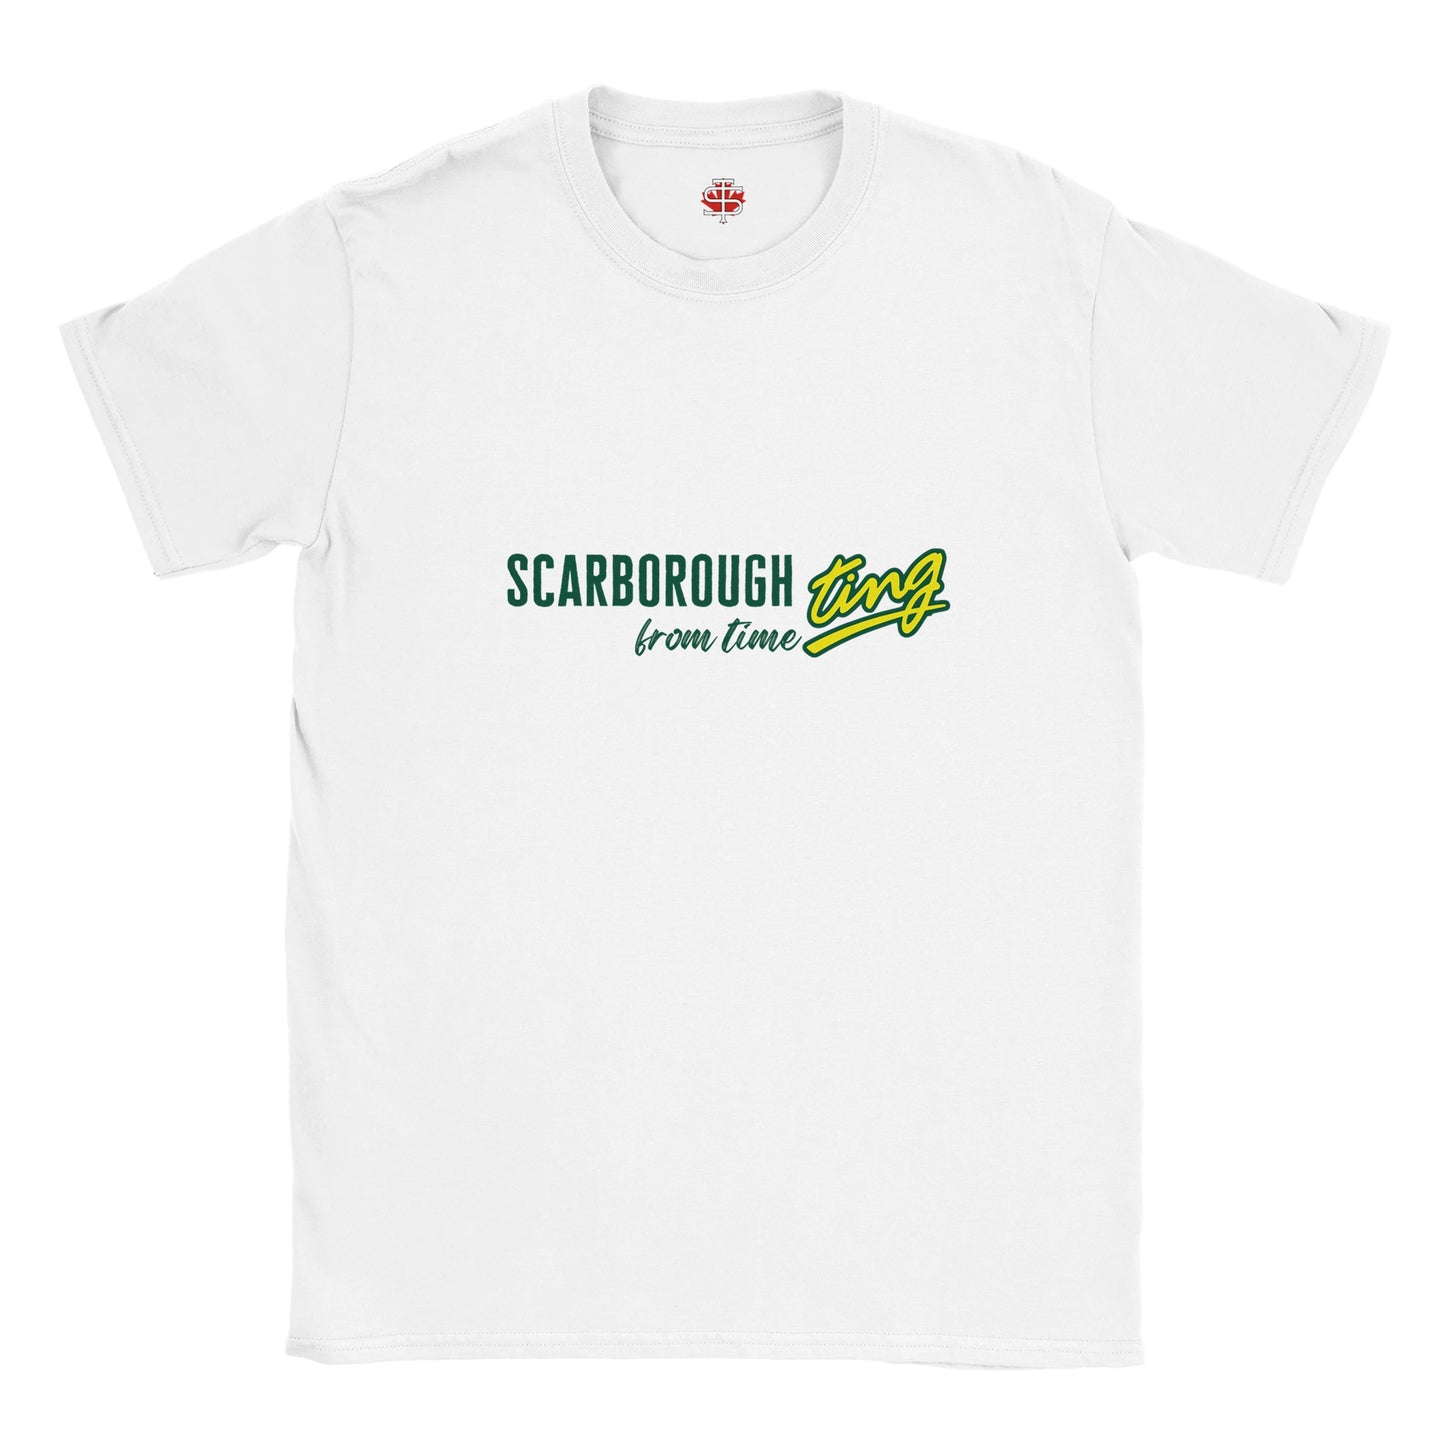 "Scarborough Ting from Time" Classic Unisex Crewneck T-shirt